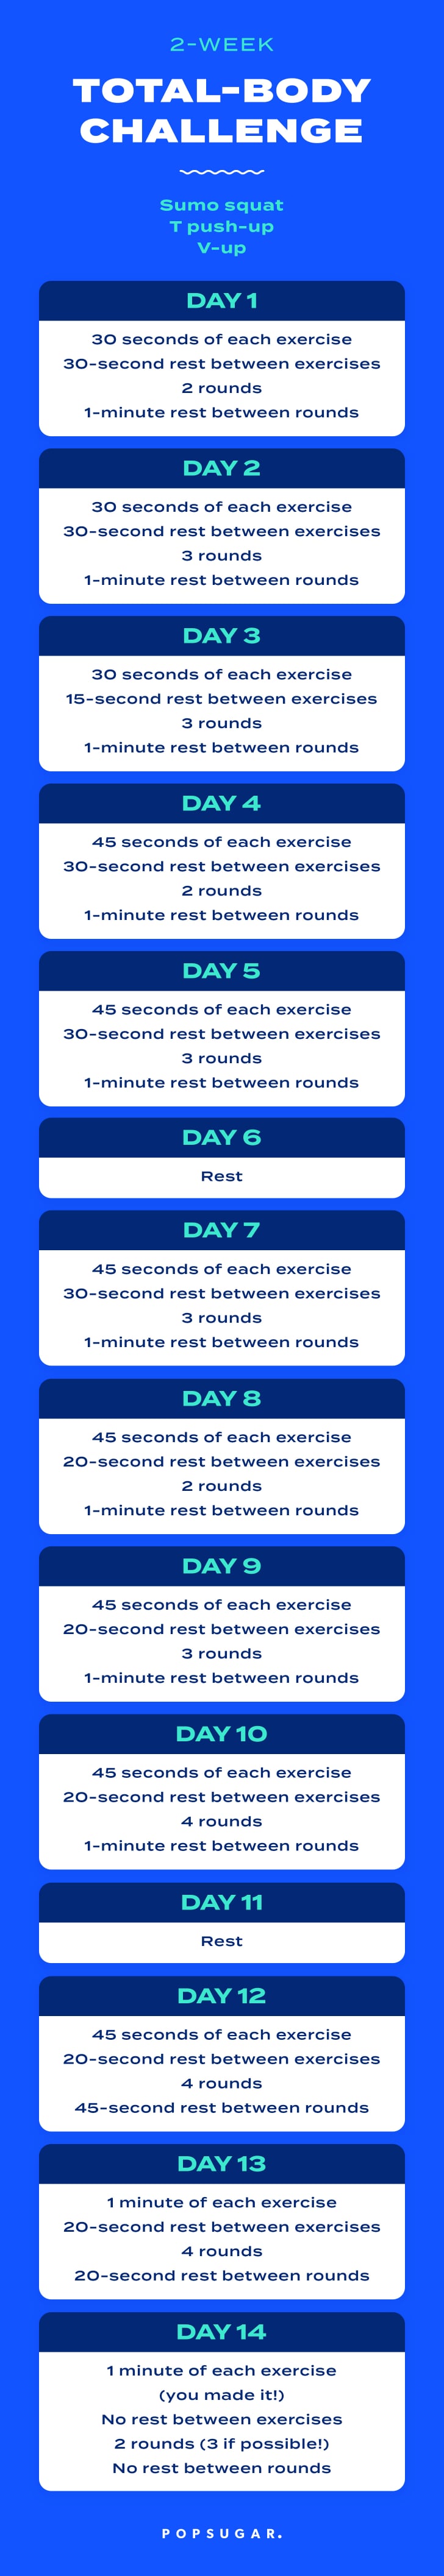 Total-Body Fitness Challenge